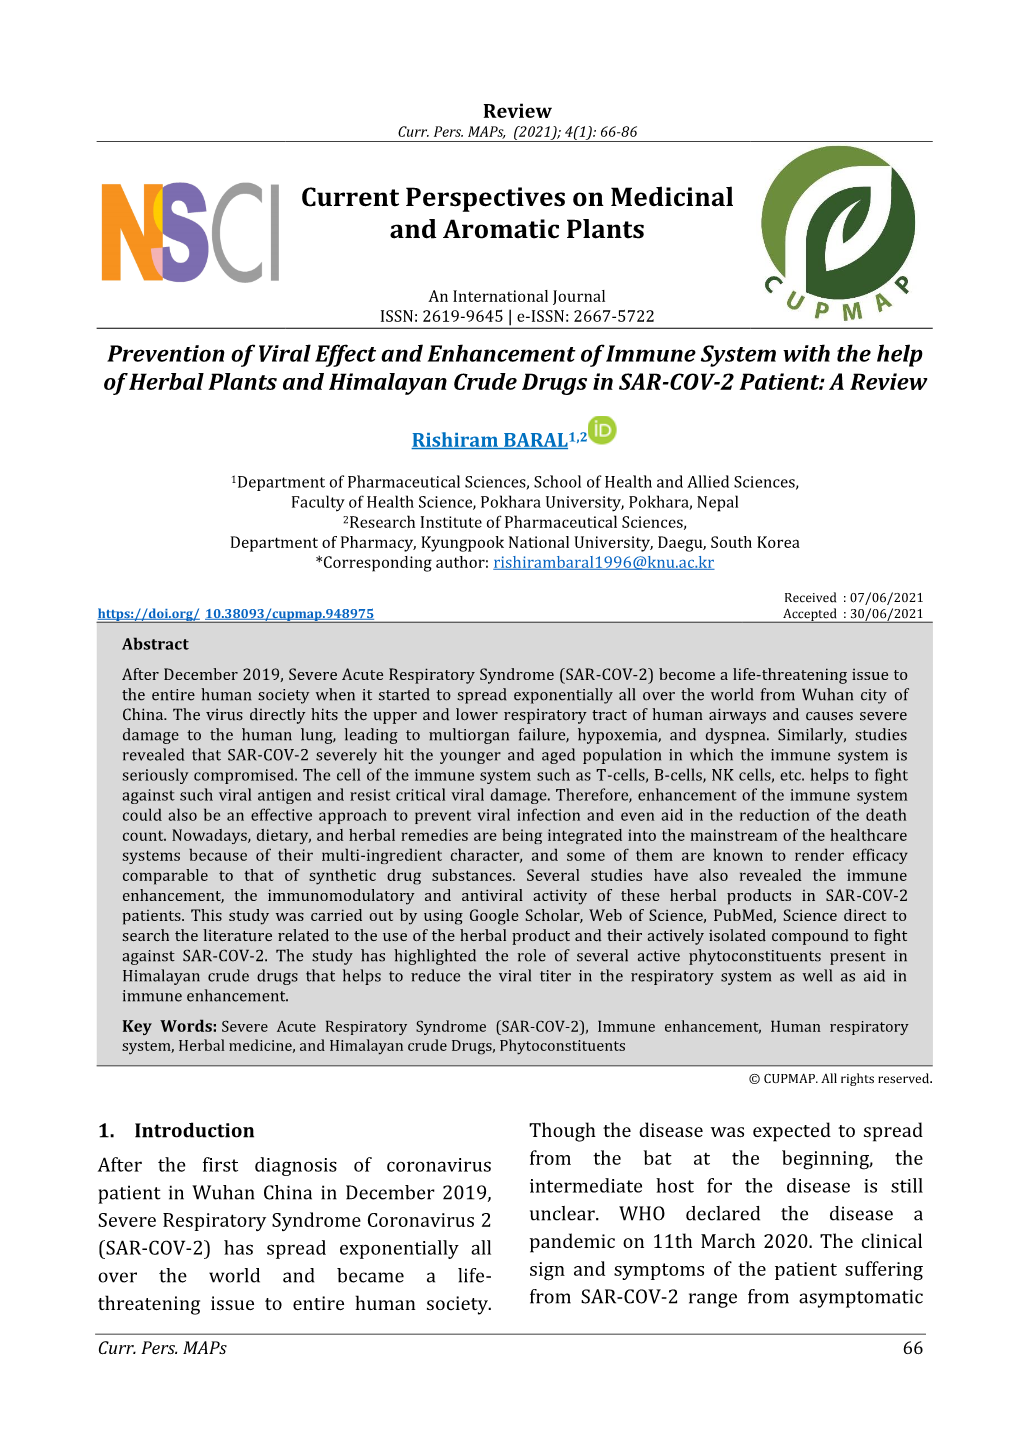 Current Perspectives on Medicinal and Aromatic Plants